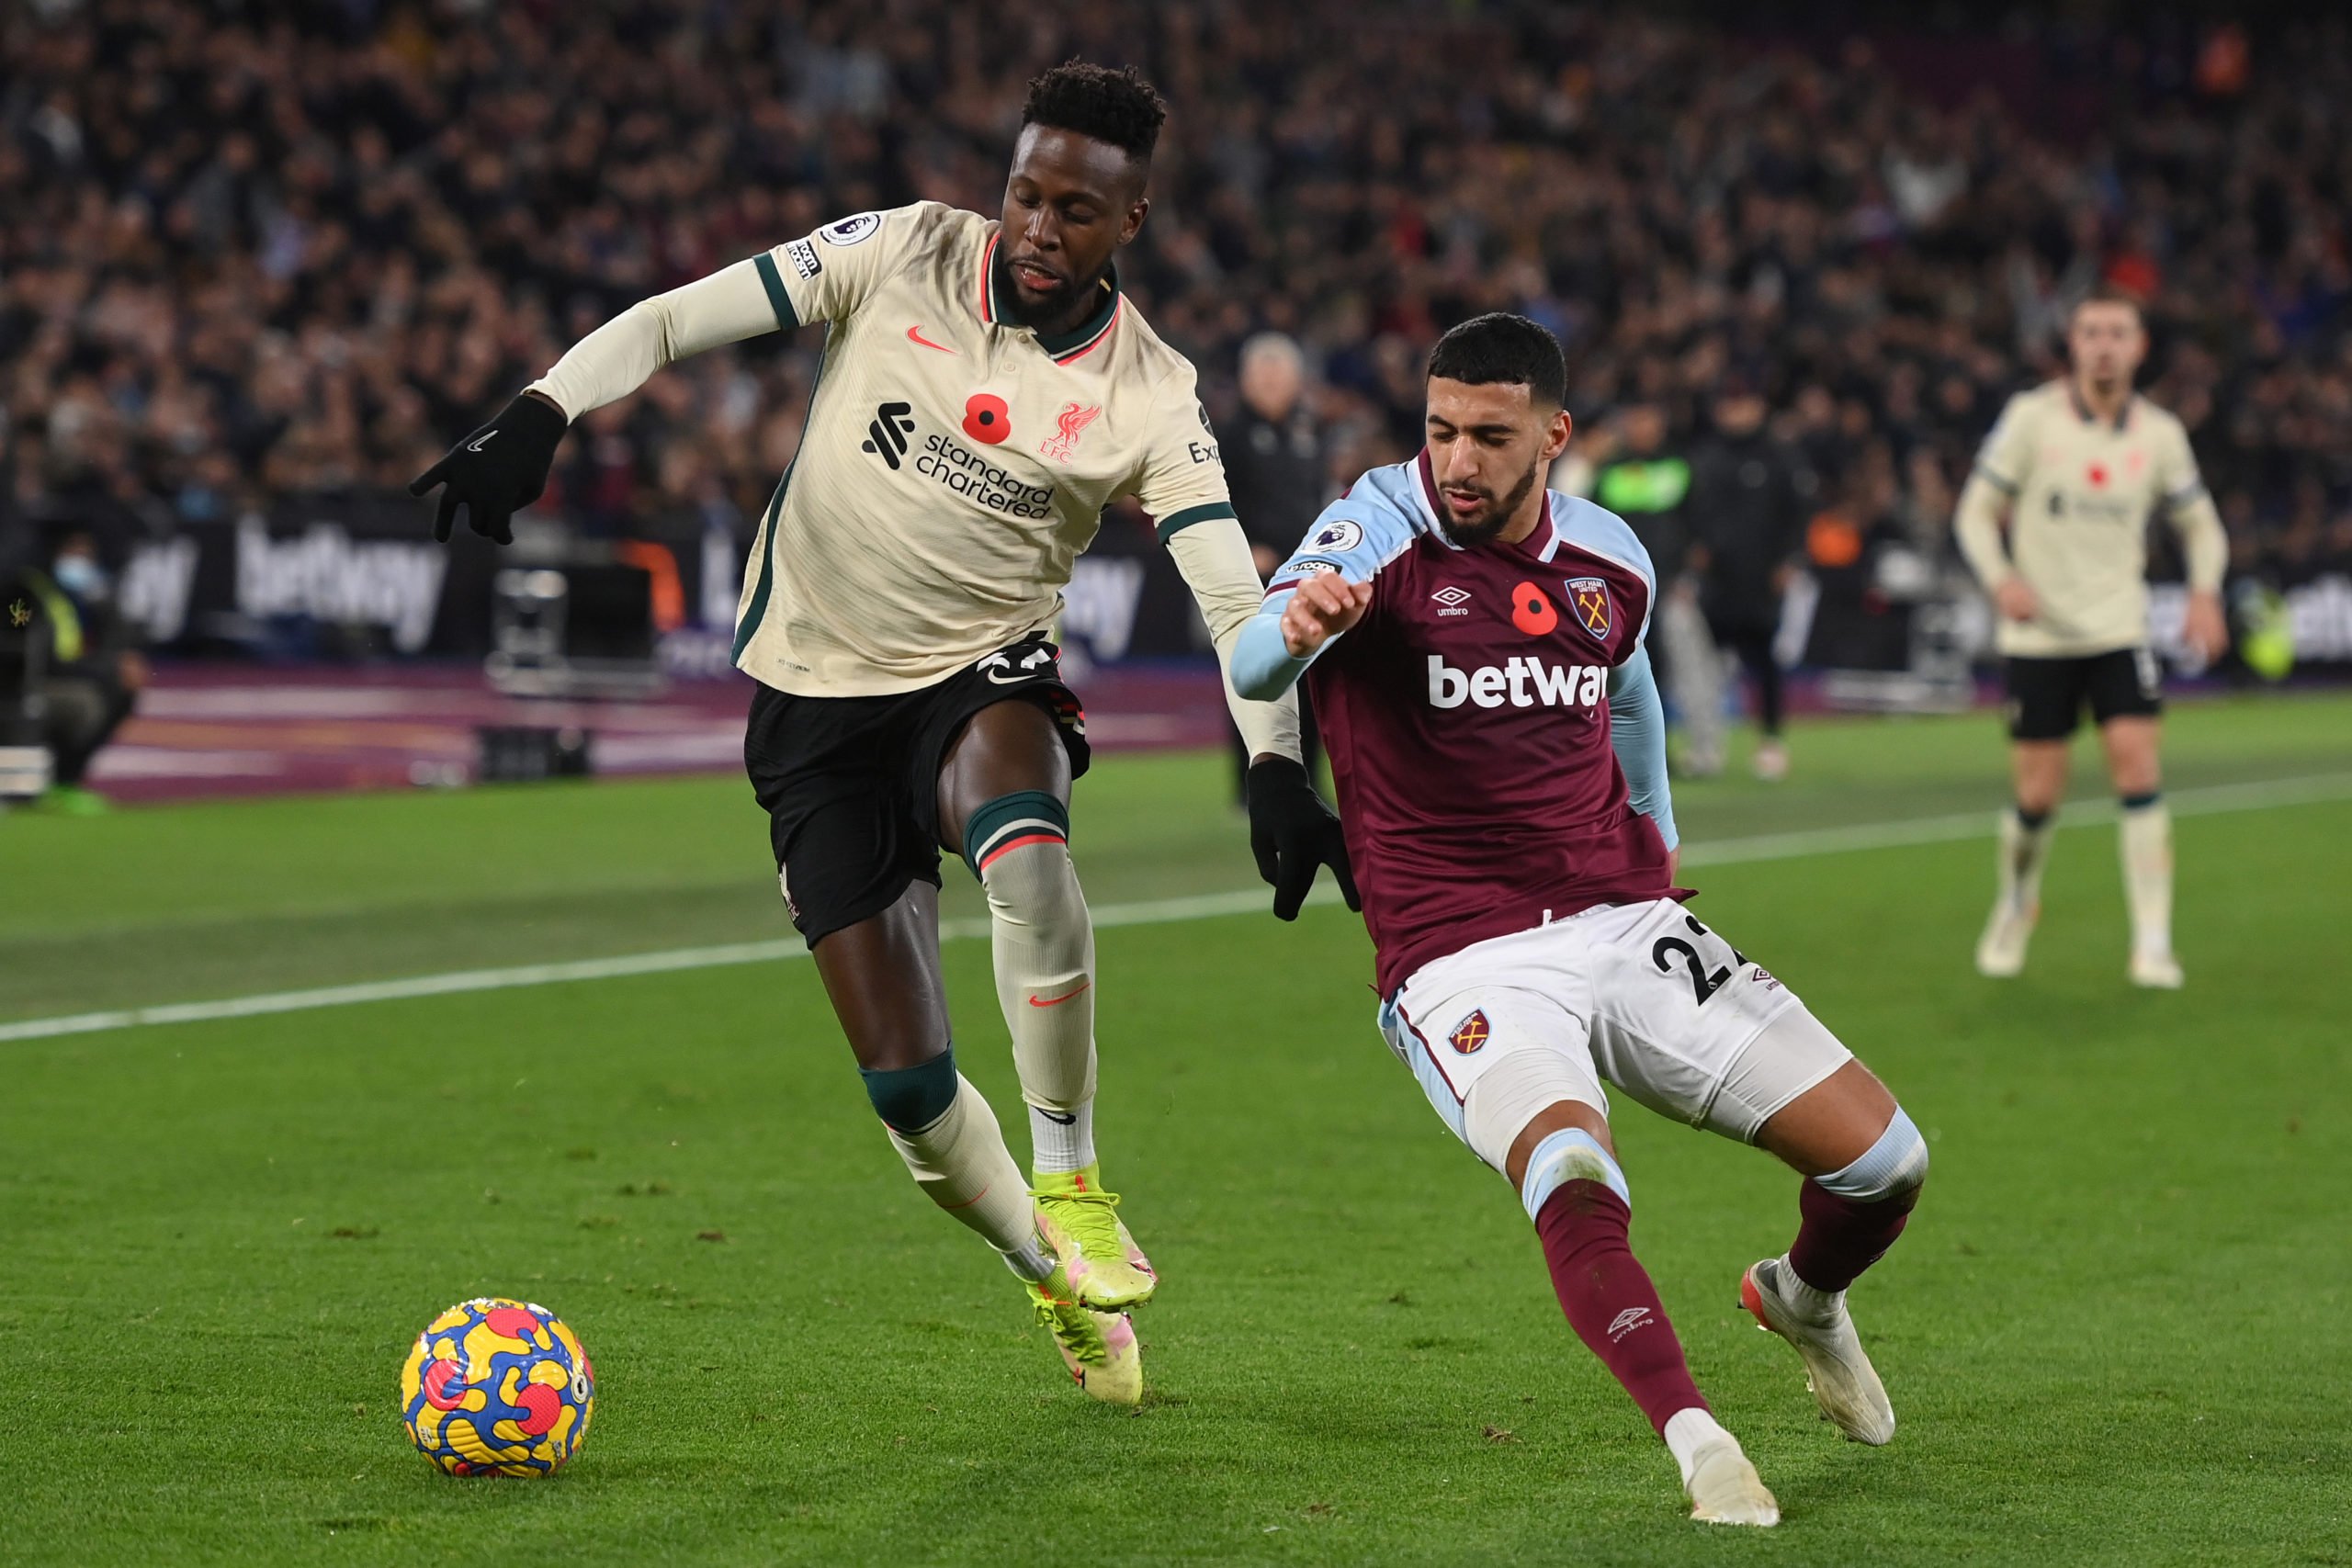 LONDON, ENGLAND - NOVEMBER 07: Divock Origi of Liverpool is challenged by Said Benrahma of West Ham United during the Premier League match between West Ham United  and  Liverpool at London Stadium on November 07, 2021 in London, England. (Photo by Mike Hewitt/Getty Images)The 4th Official uses images provided by the following image agency: Getty Images (https://www.gettyimages.de/) Imago Images (https://www.imago-images.de/)